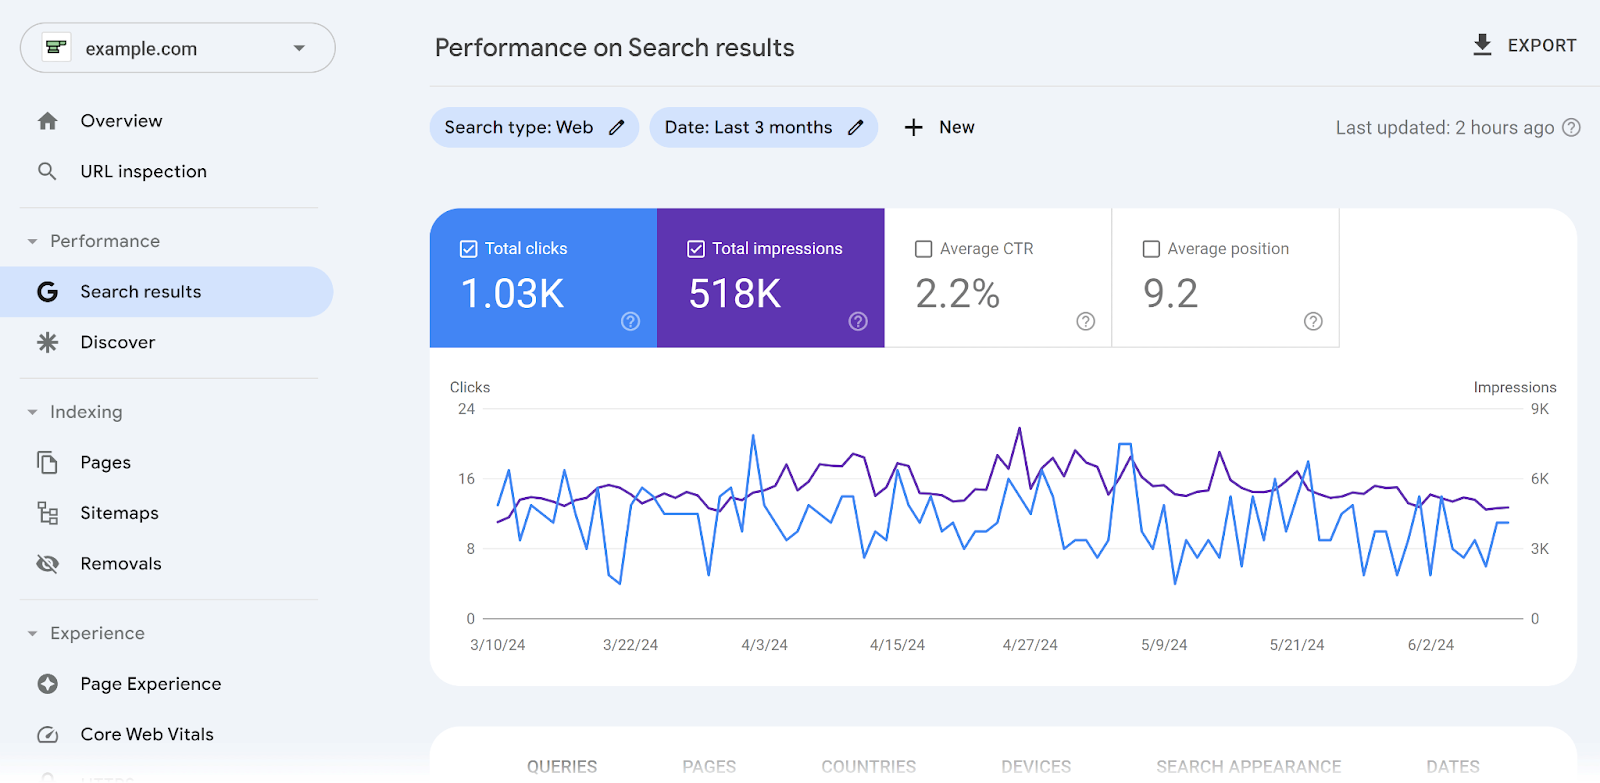 Performance on Search Results report in GSC showing overlapping graph for clicks and impressions.